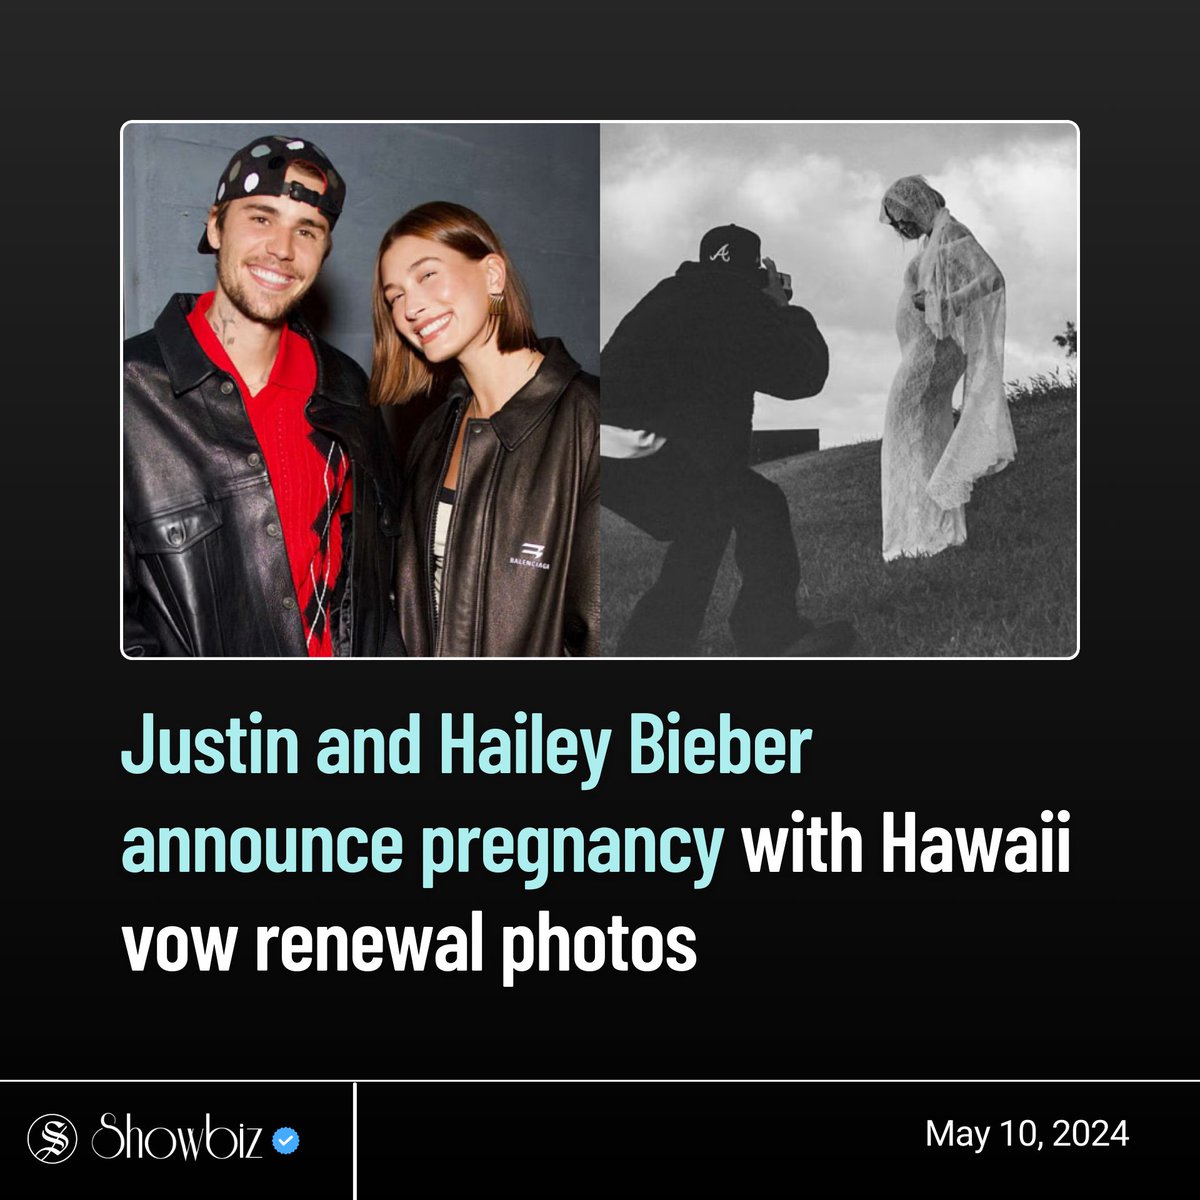 Read more: tinyurl.com/yzc6tp52

The 'Peaches' singer revealed his wife's pregnancy with a series of touching photos from their intimate ceremony.

#JustinBieber #NewsUpdates #EntertainmentNews #HaileyBieber